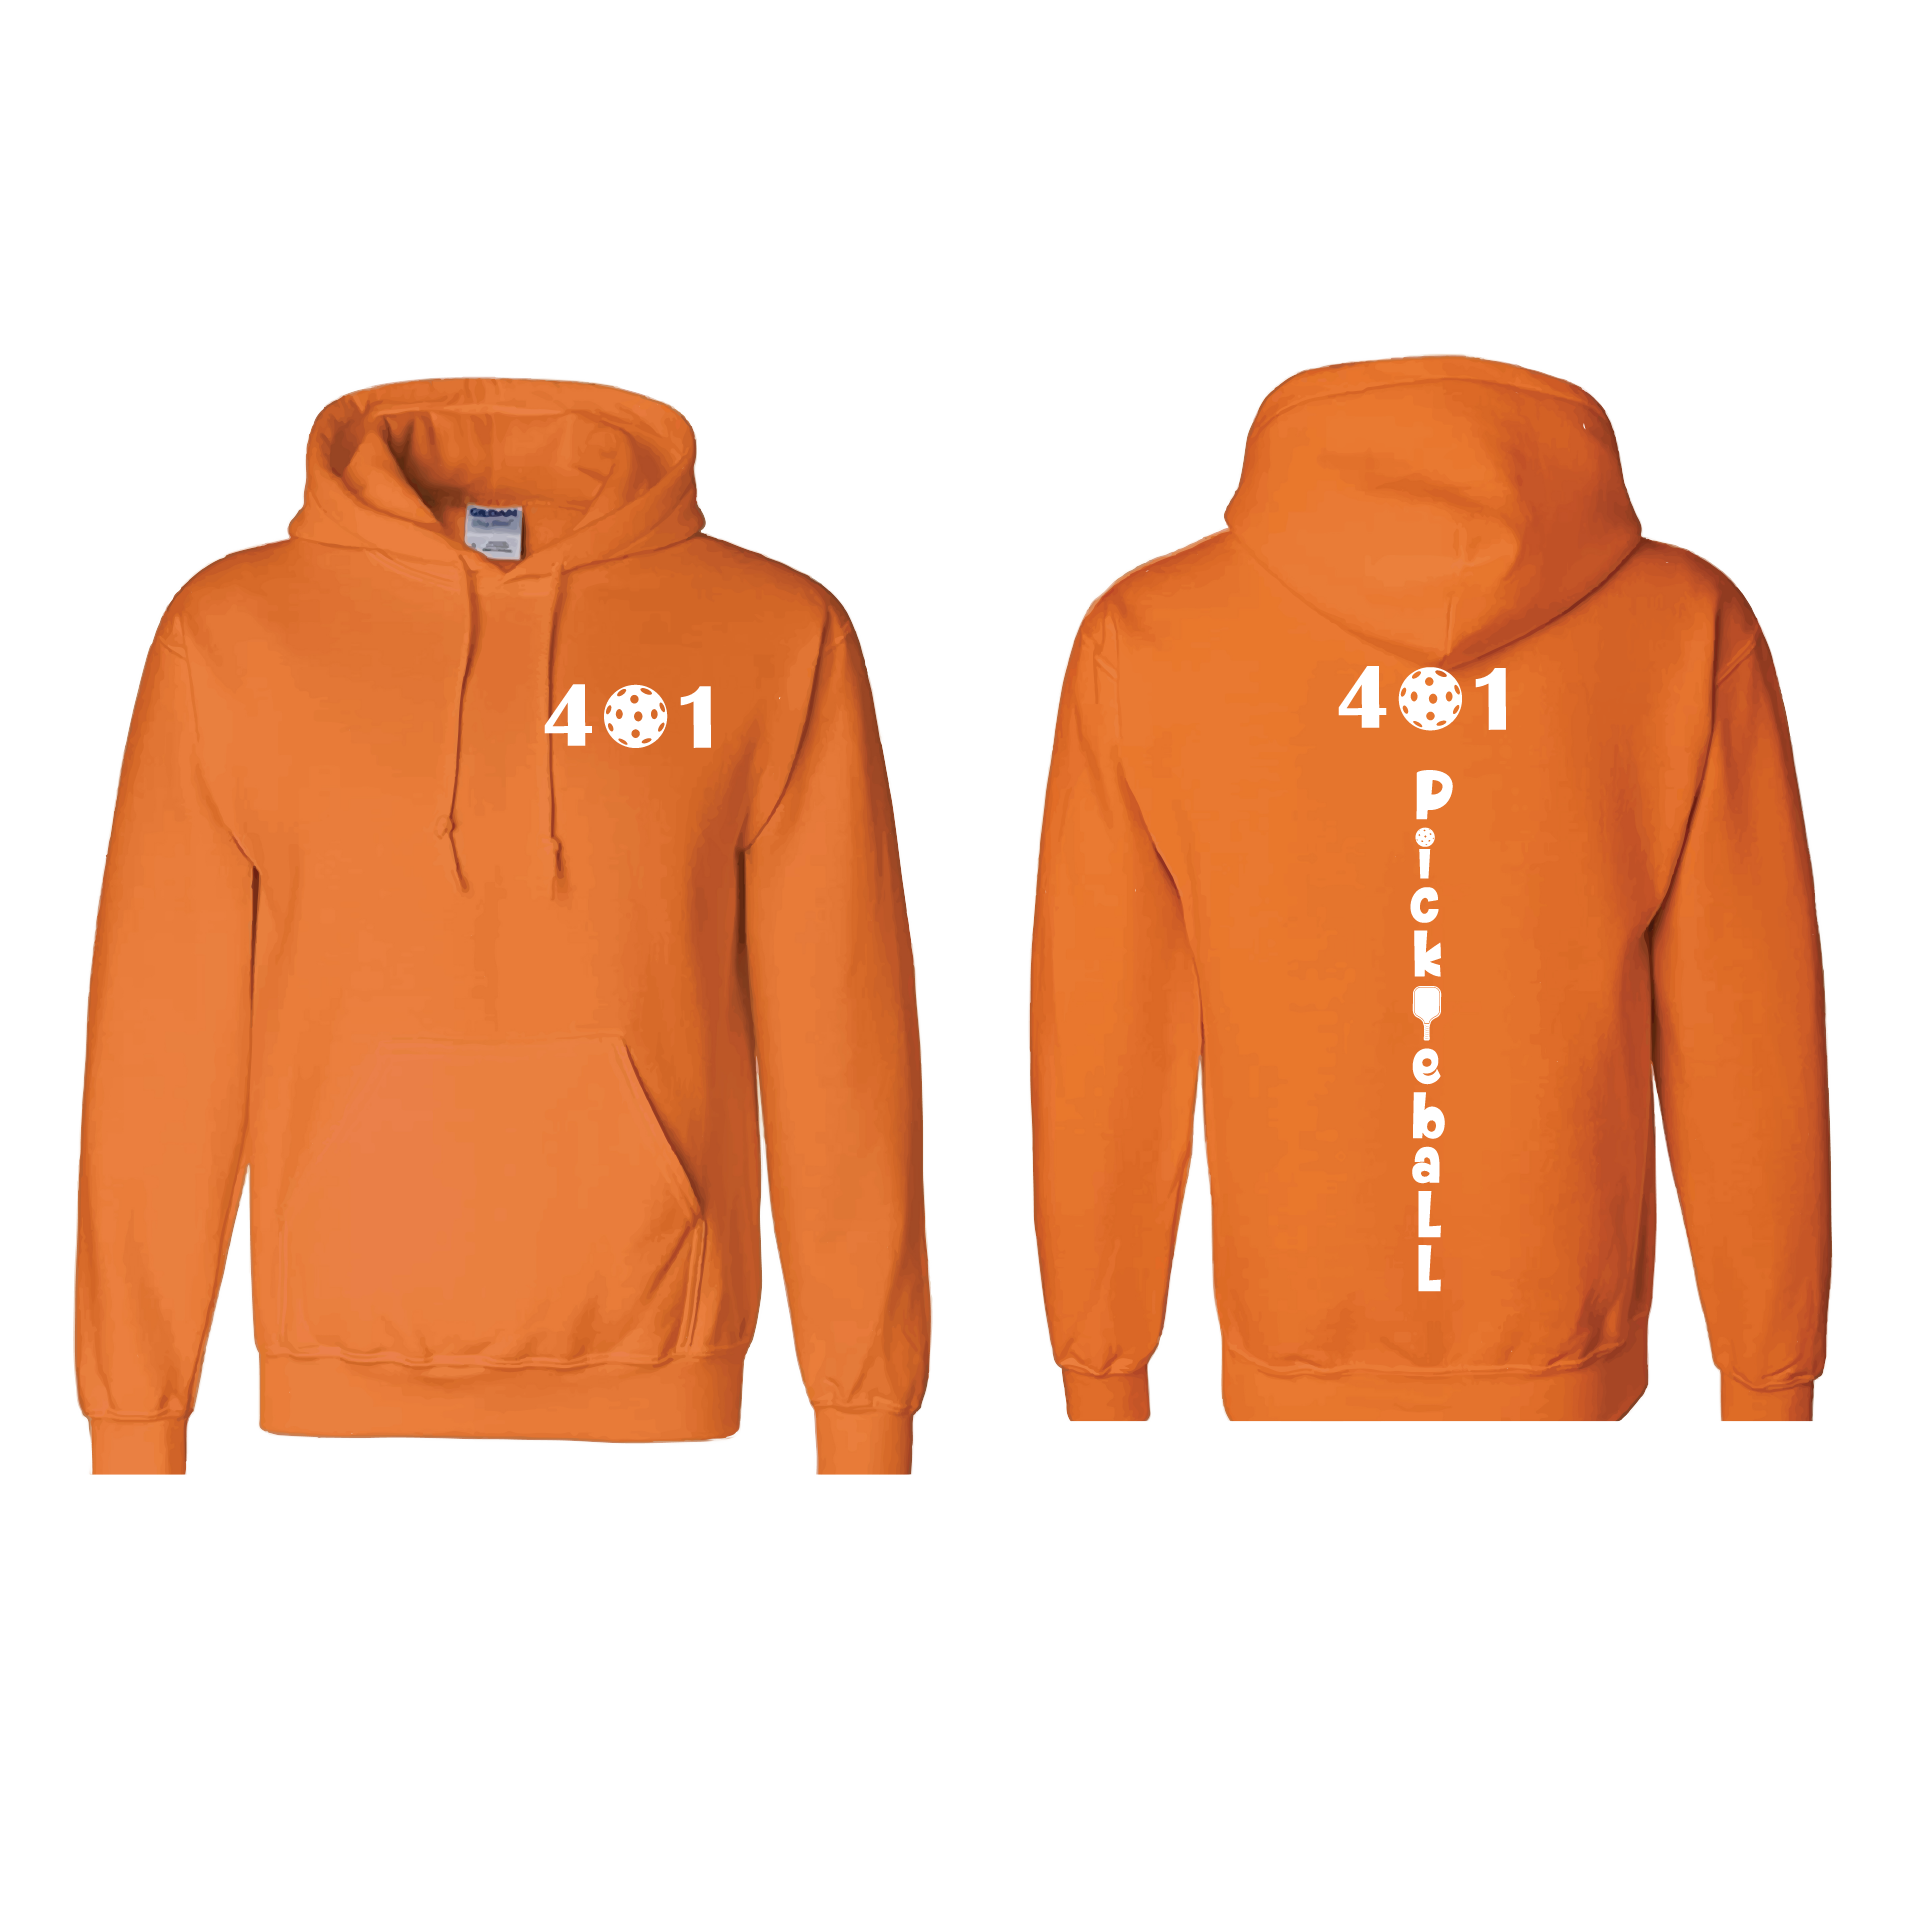 Design: 401 Pickleball  Unisex Hooded Sweatshirt: Moisture-wicking, double-lined hood, front pouch pocket.  This unisex hooded sweatshirt is ultra comfortable and soft. Stay warm on the Pickleball courts while being a hit with this one of kind design.